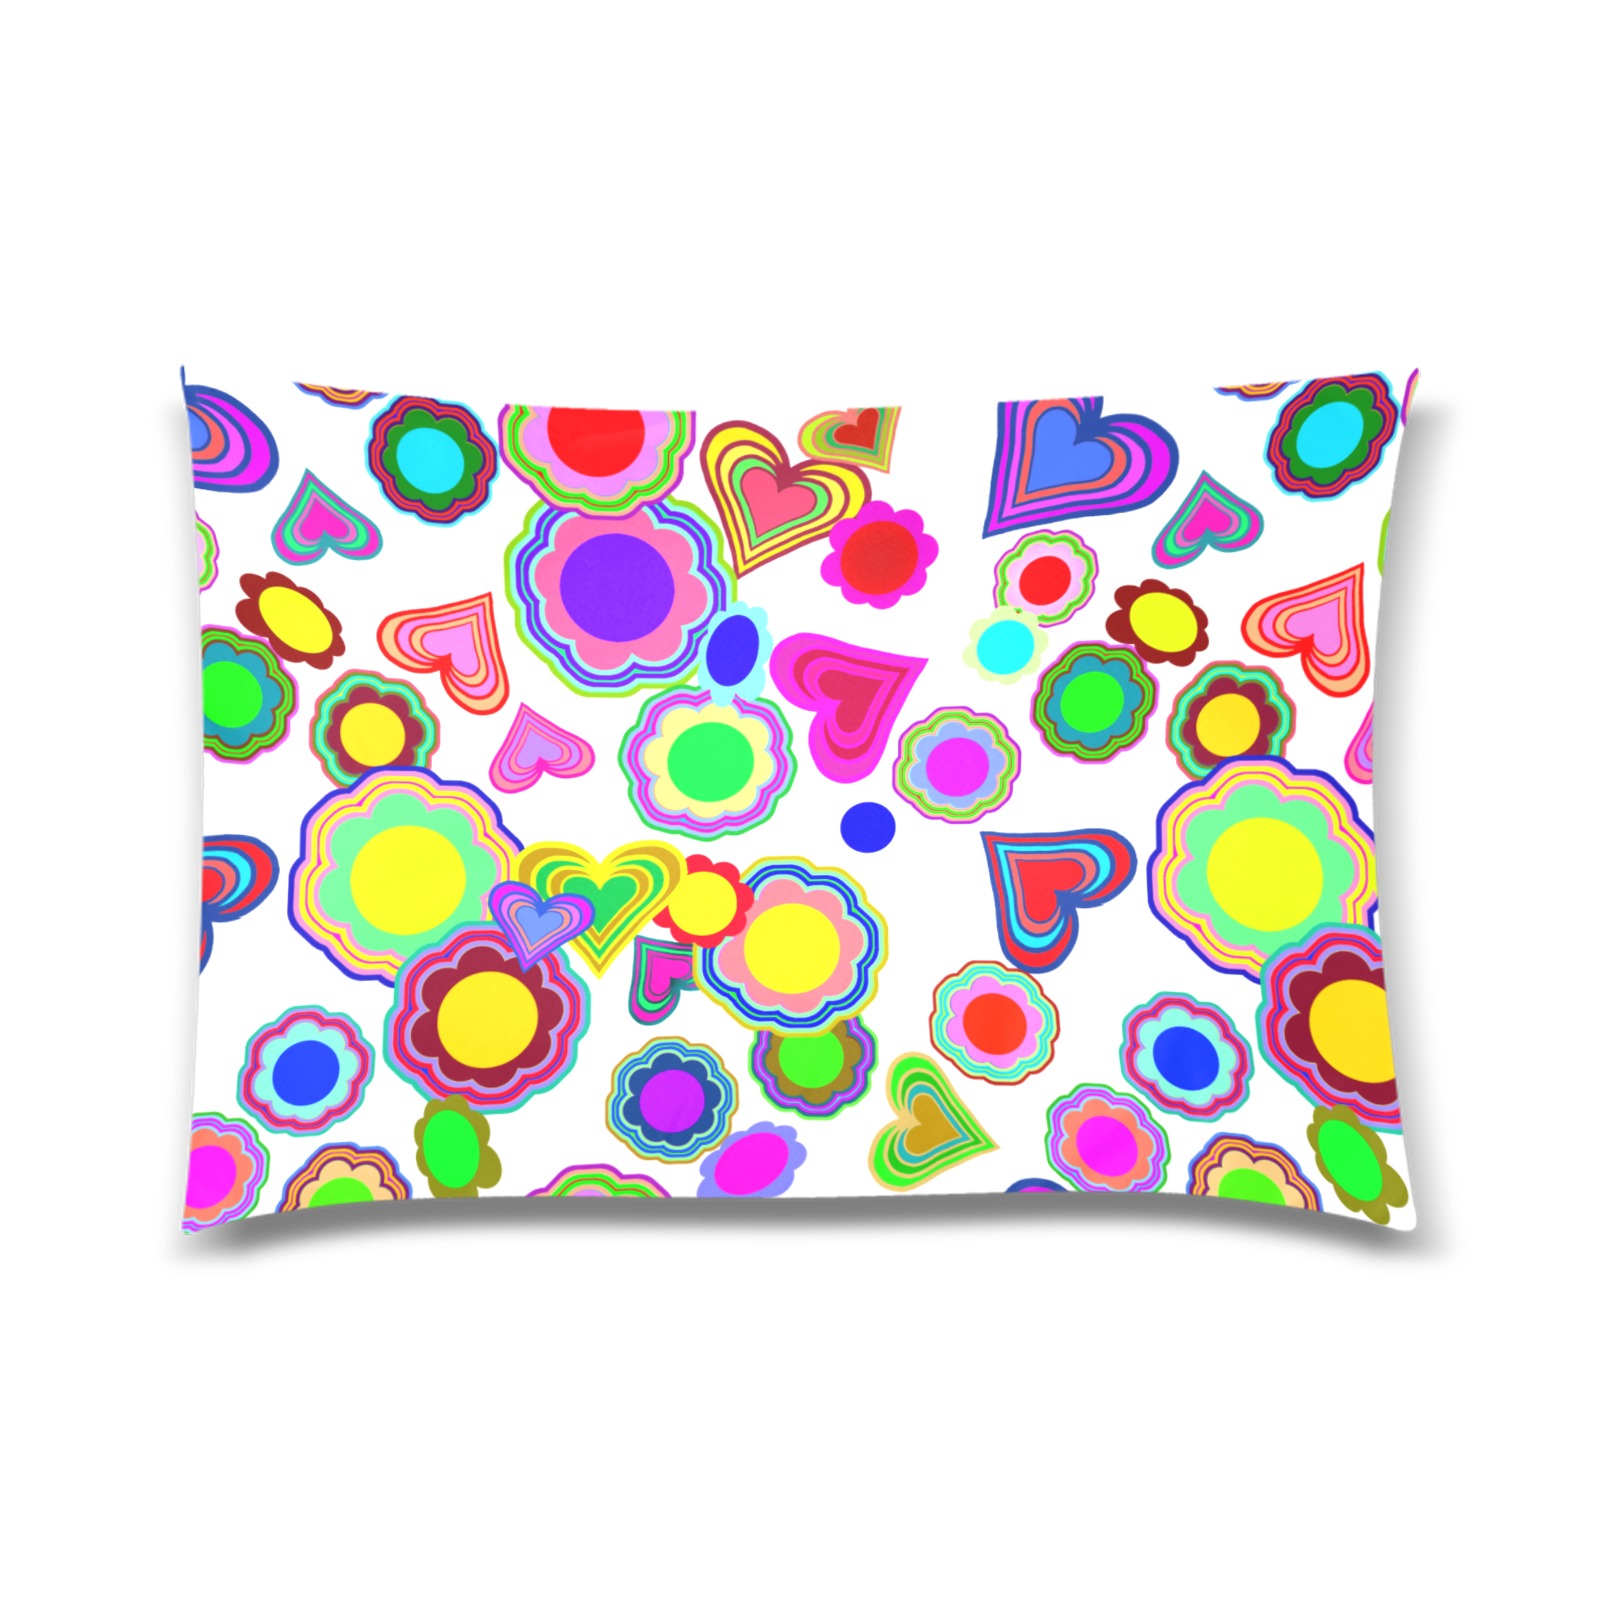 Groovy Hearts and Flowers White Custom Zippered Pillow Case 20"x30" (one side)